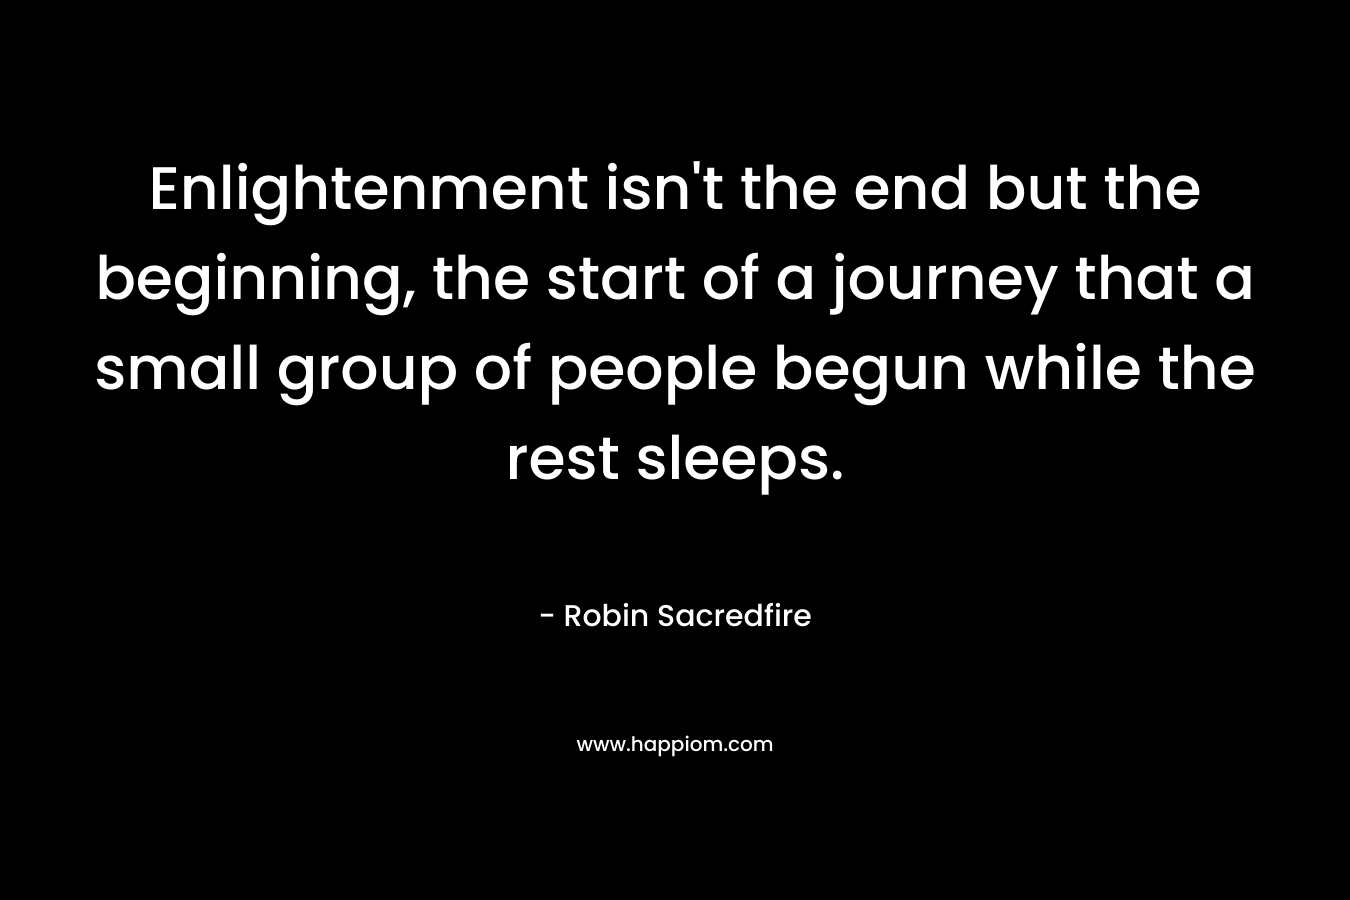 Enlightenment isn't the end but the beginning, the start of a journey that a small group of people begun while the rest sleeps.